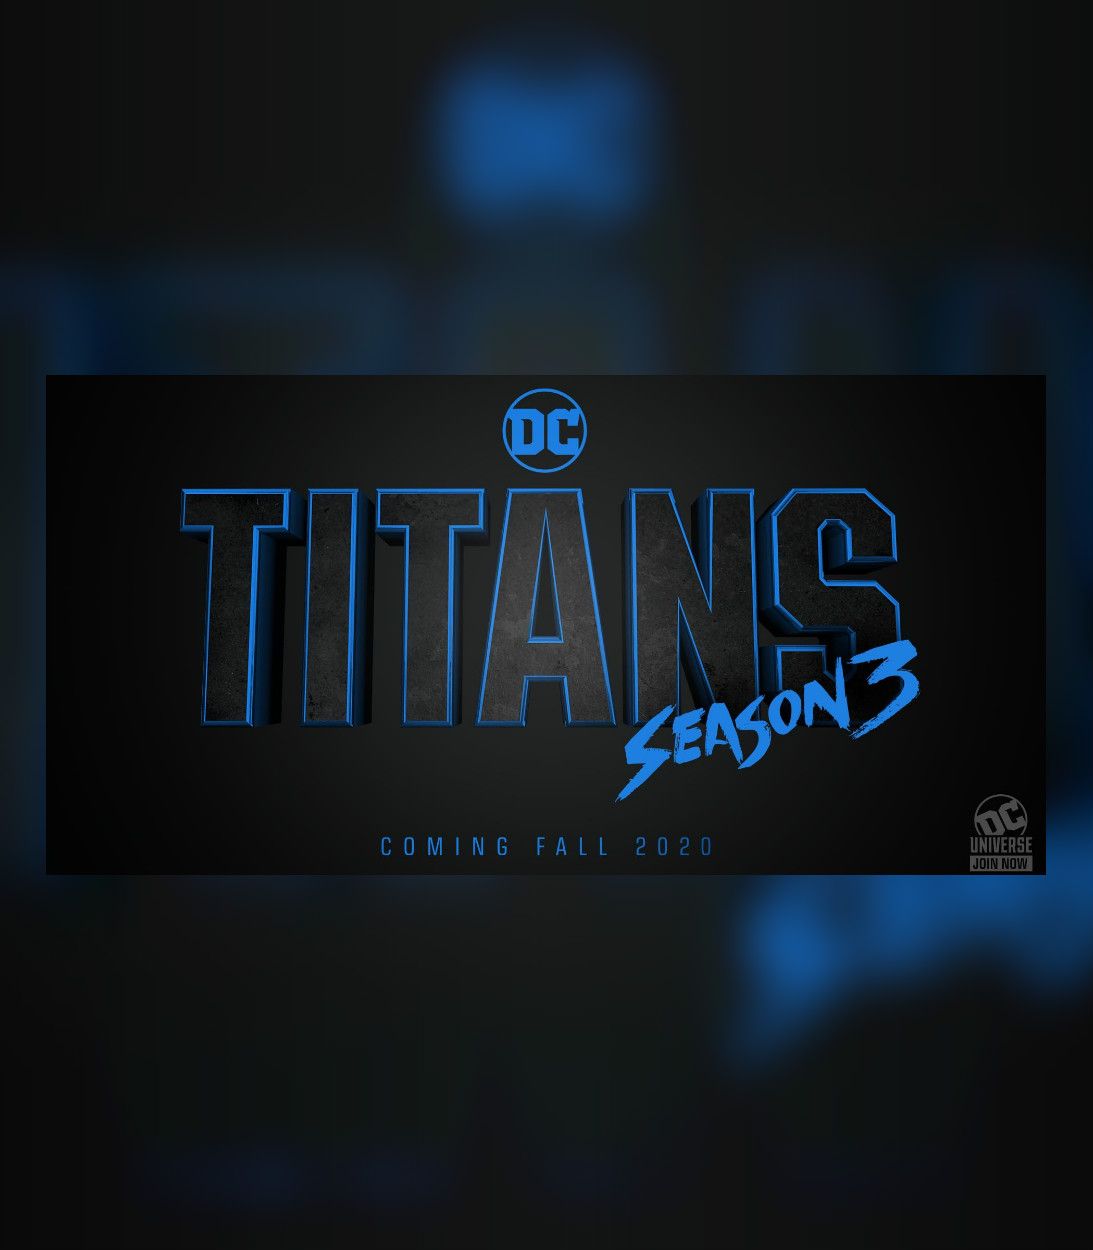 Titans season 3 confirmed for Fall 2020 on DC Universe